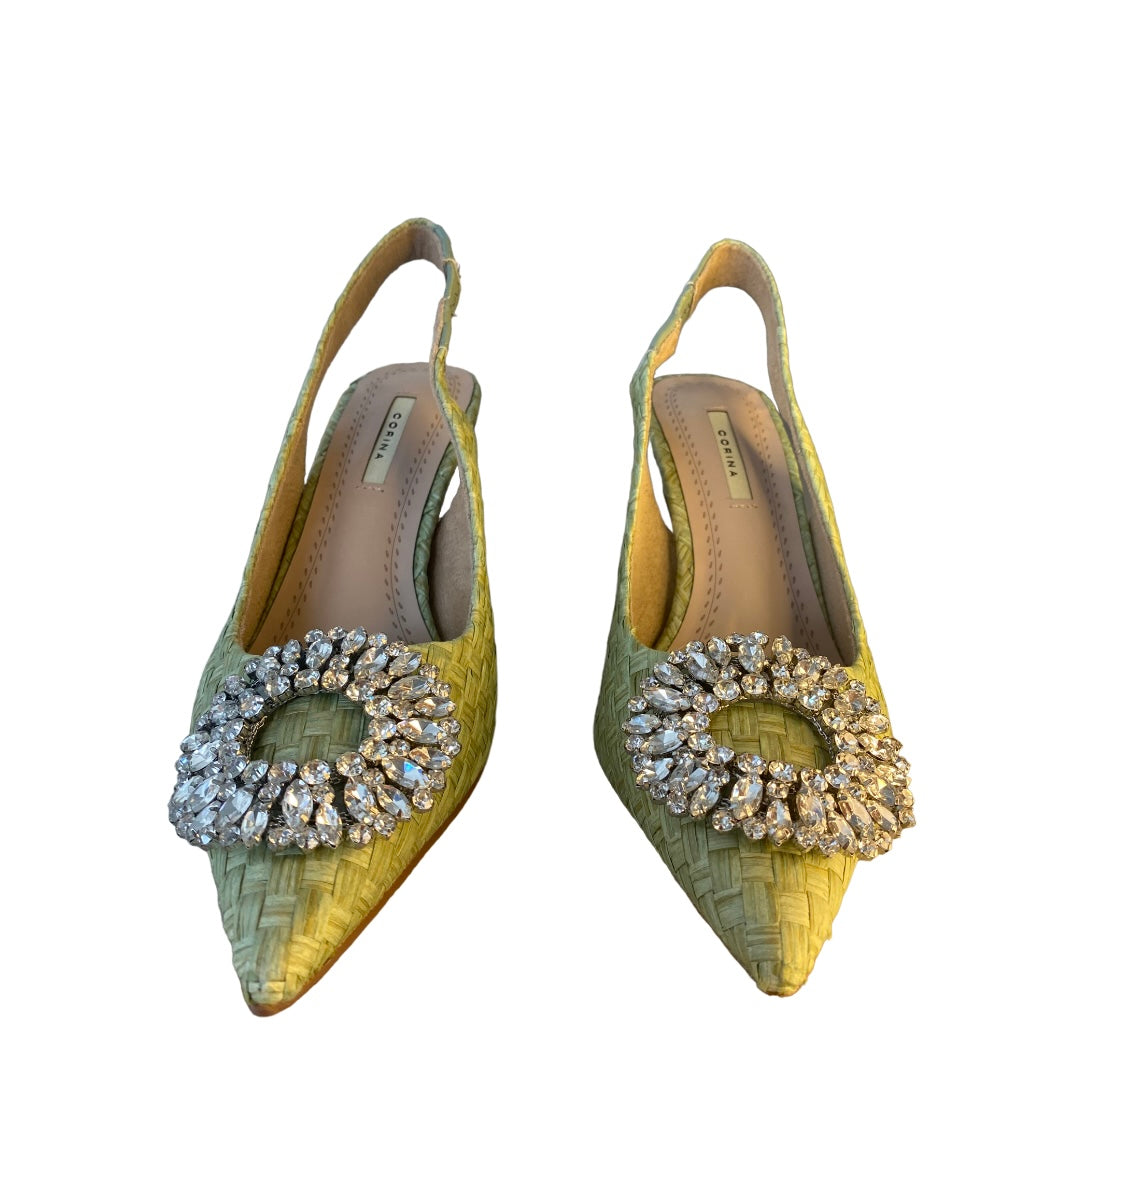 ORNAMENTED SLOTTED HEELED SHOES